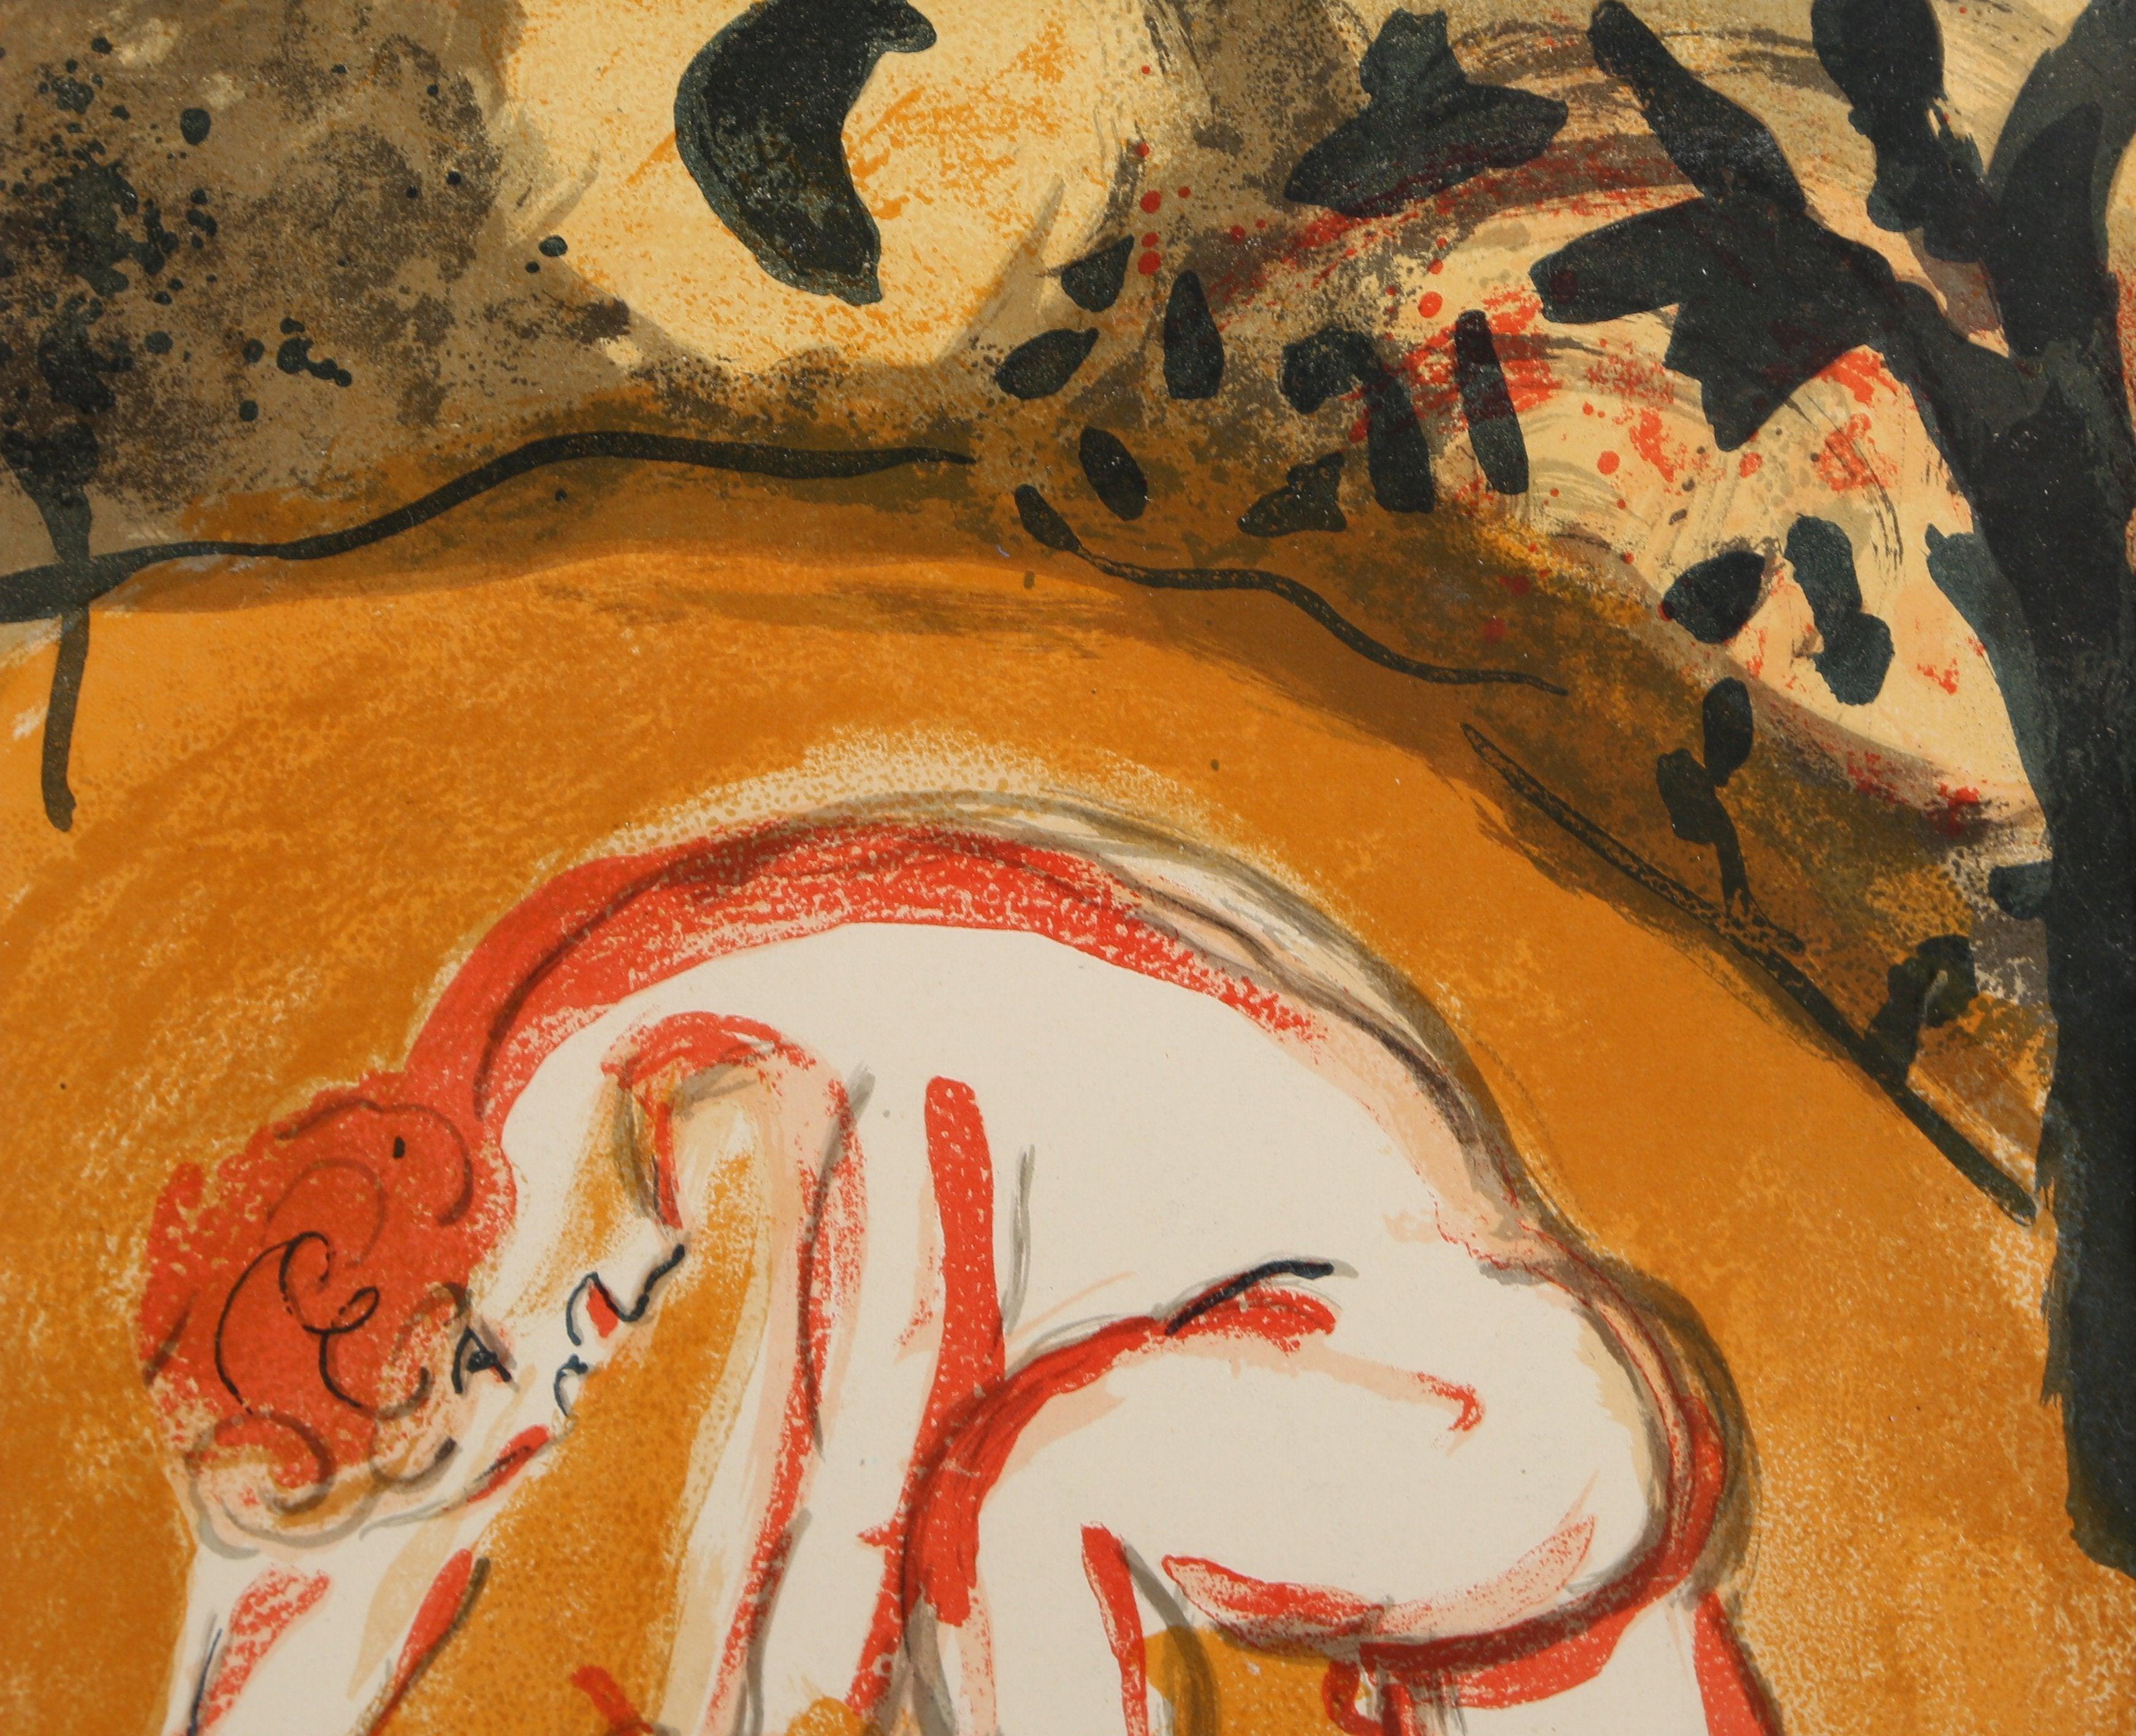 Cain And Abel | Marc Chagall | RoGallery